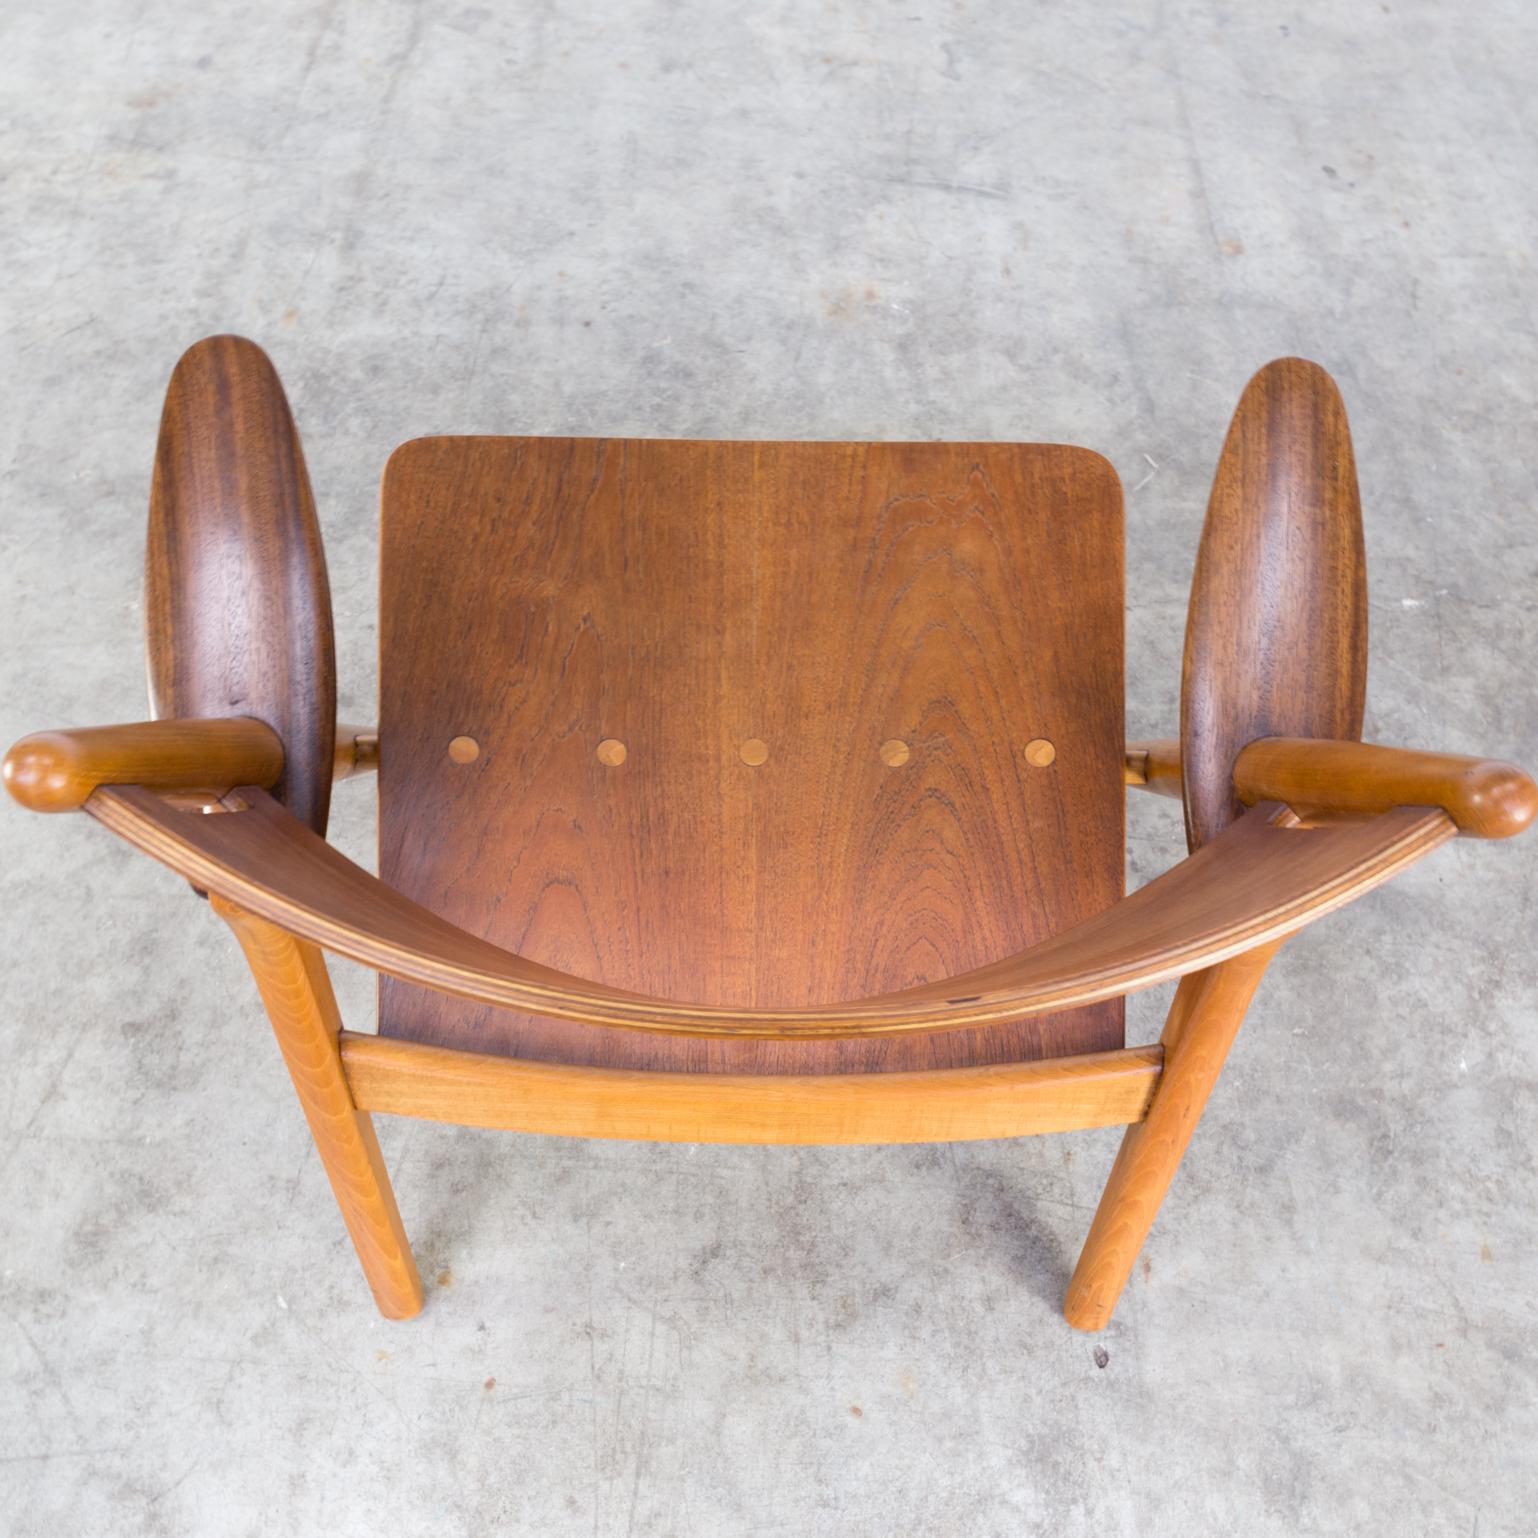 1950s Hans Wegner ‘Ch28t’ Fauteuil for Carl Hansen & Søn Set of Two For Sale 6